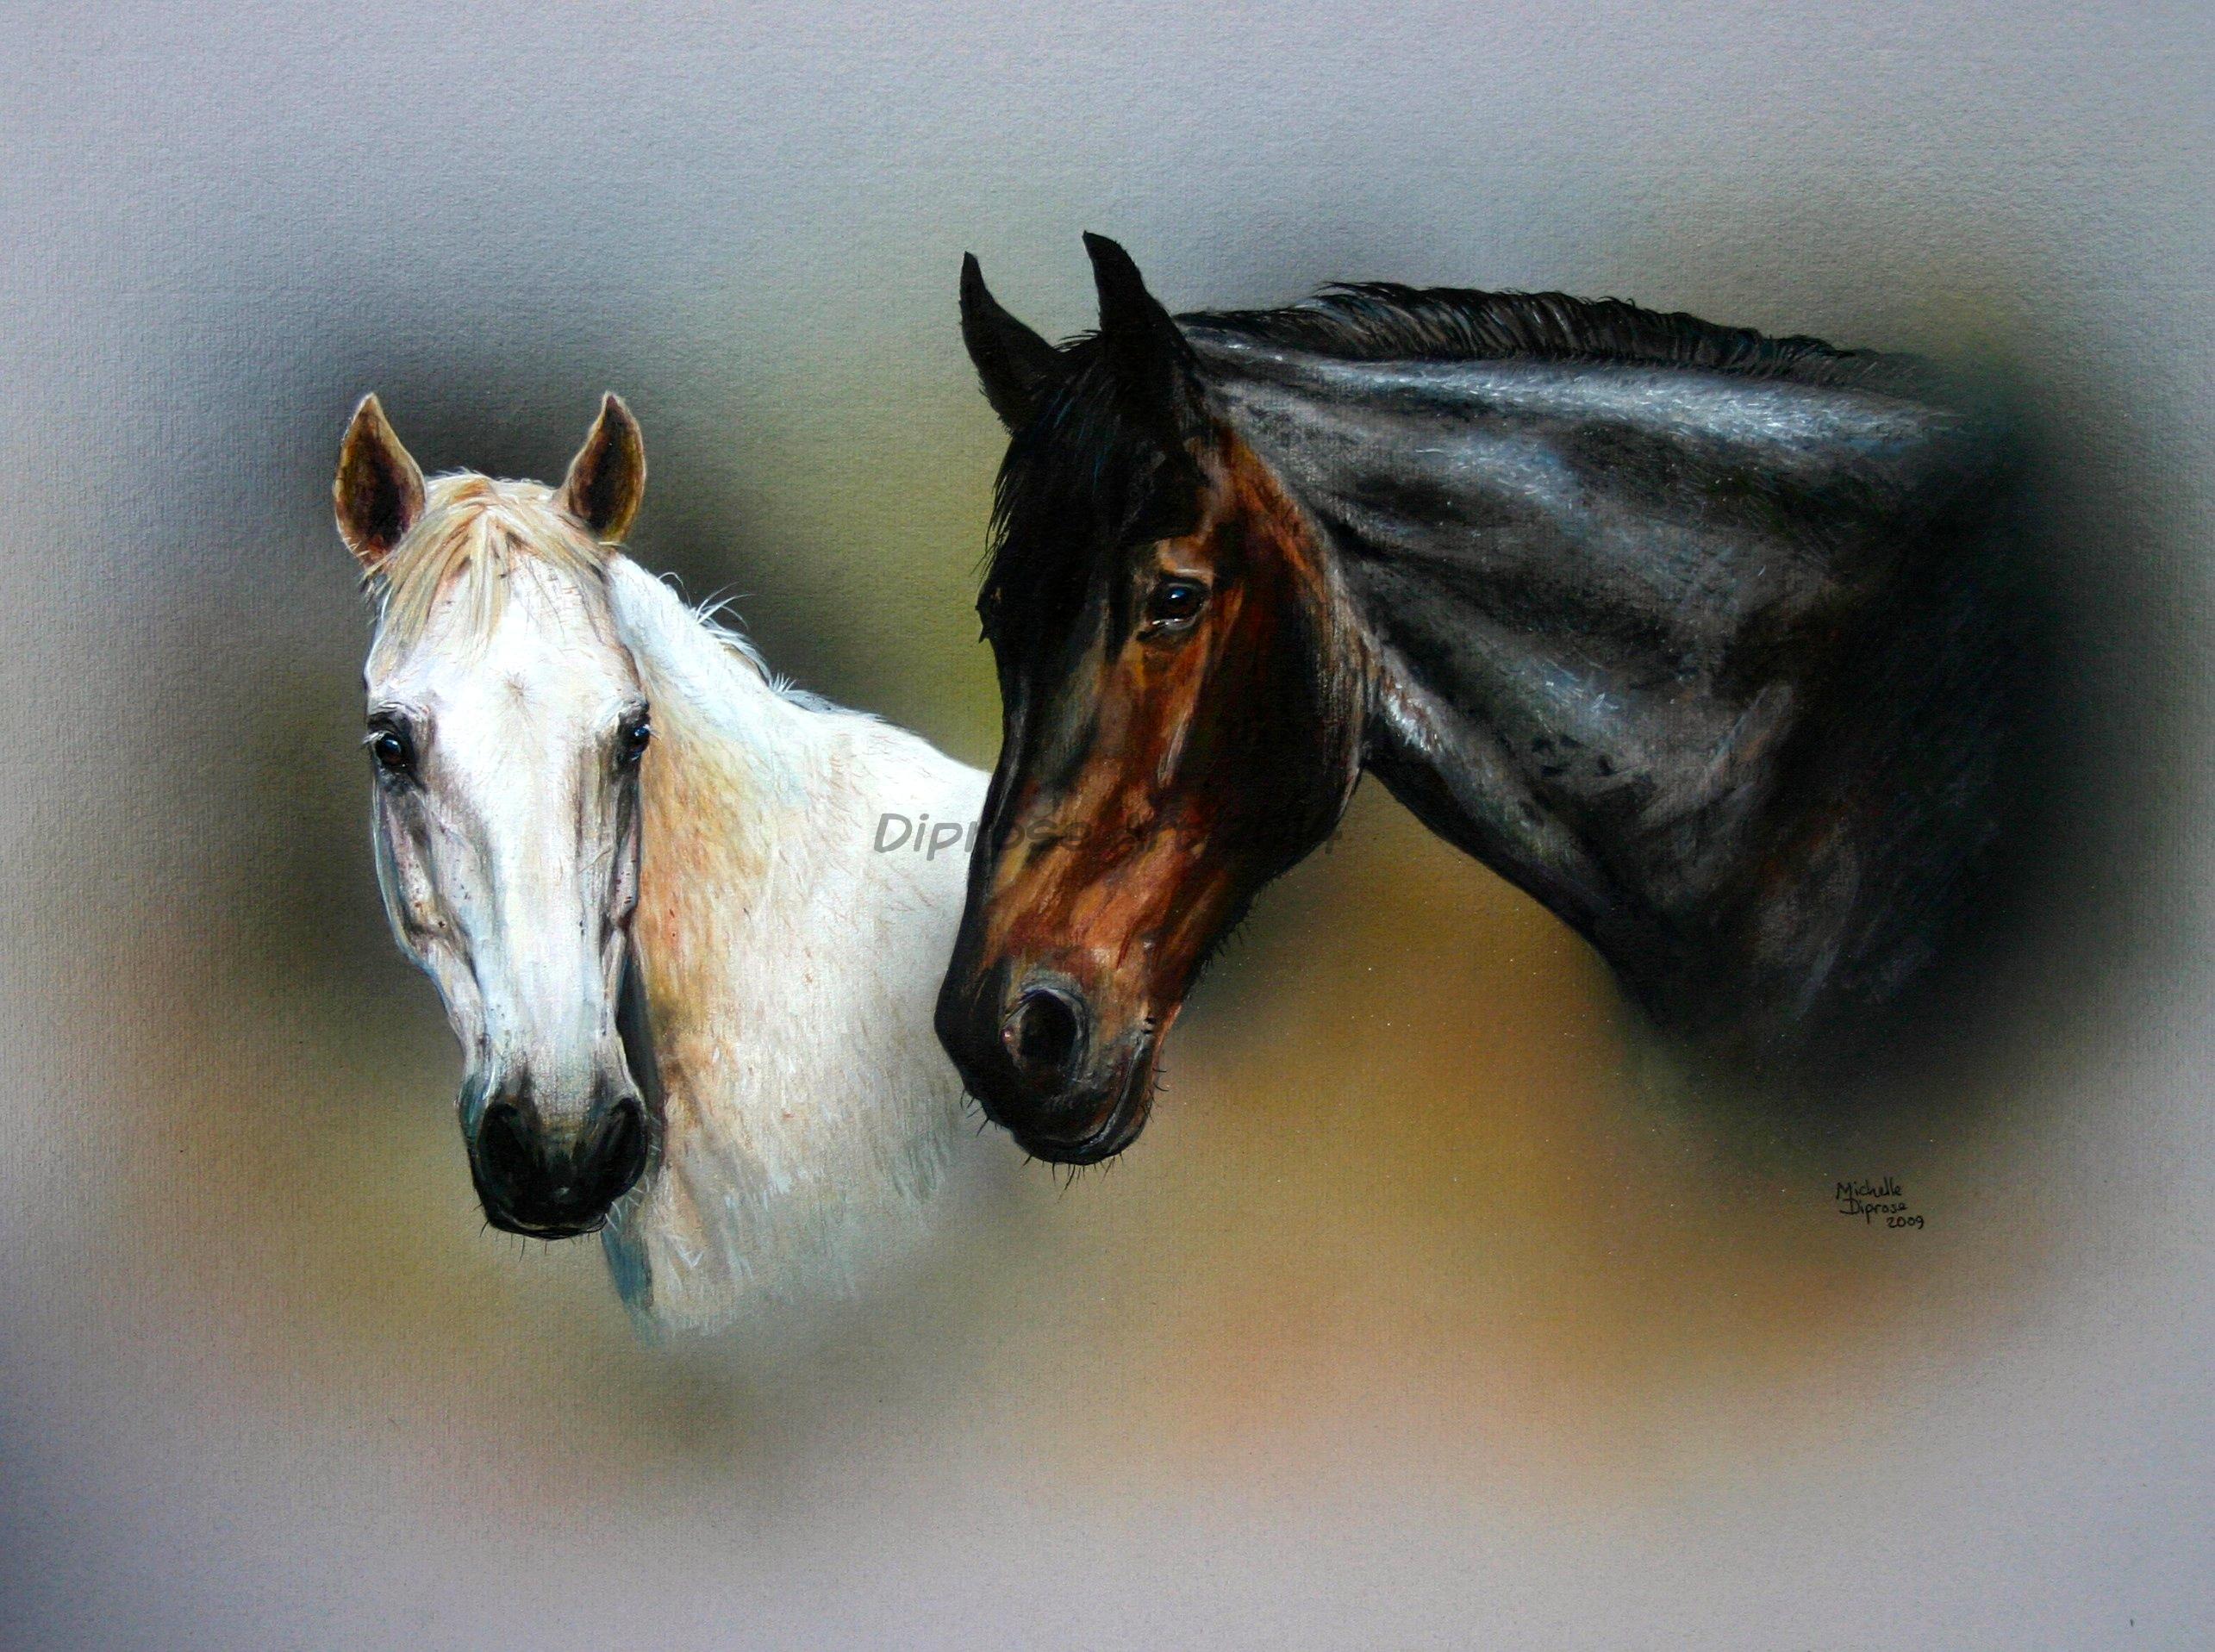 Acrylics on board - approx A3 - horse portraits - this painting completed a trio of paintings - the two friends together.  It was a privilege to meet and paint them. They are both depicted separately in different paintings, galloping.